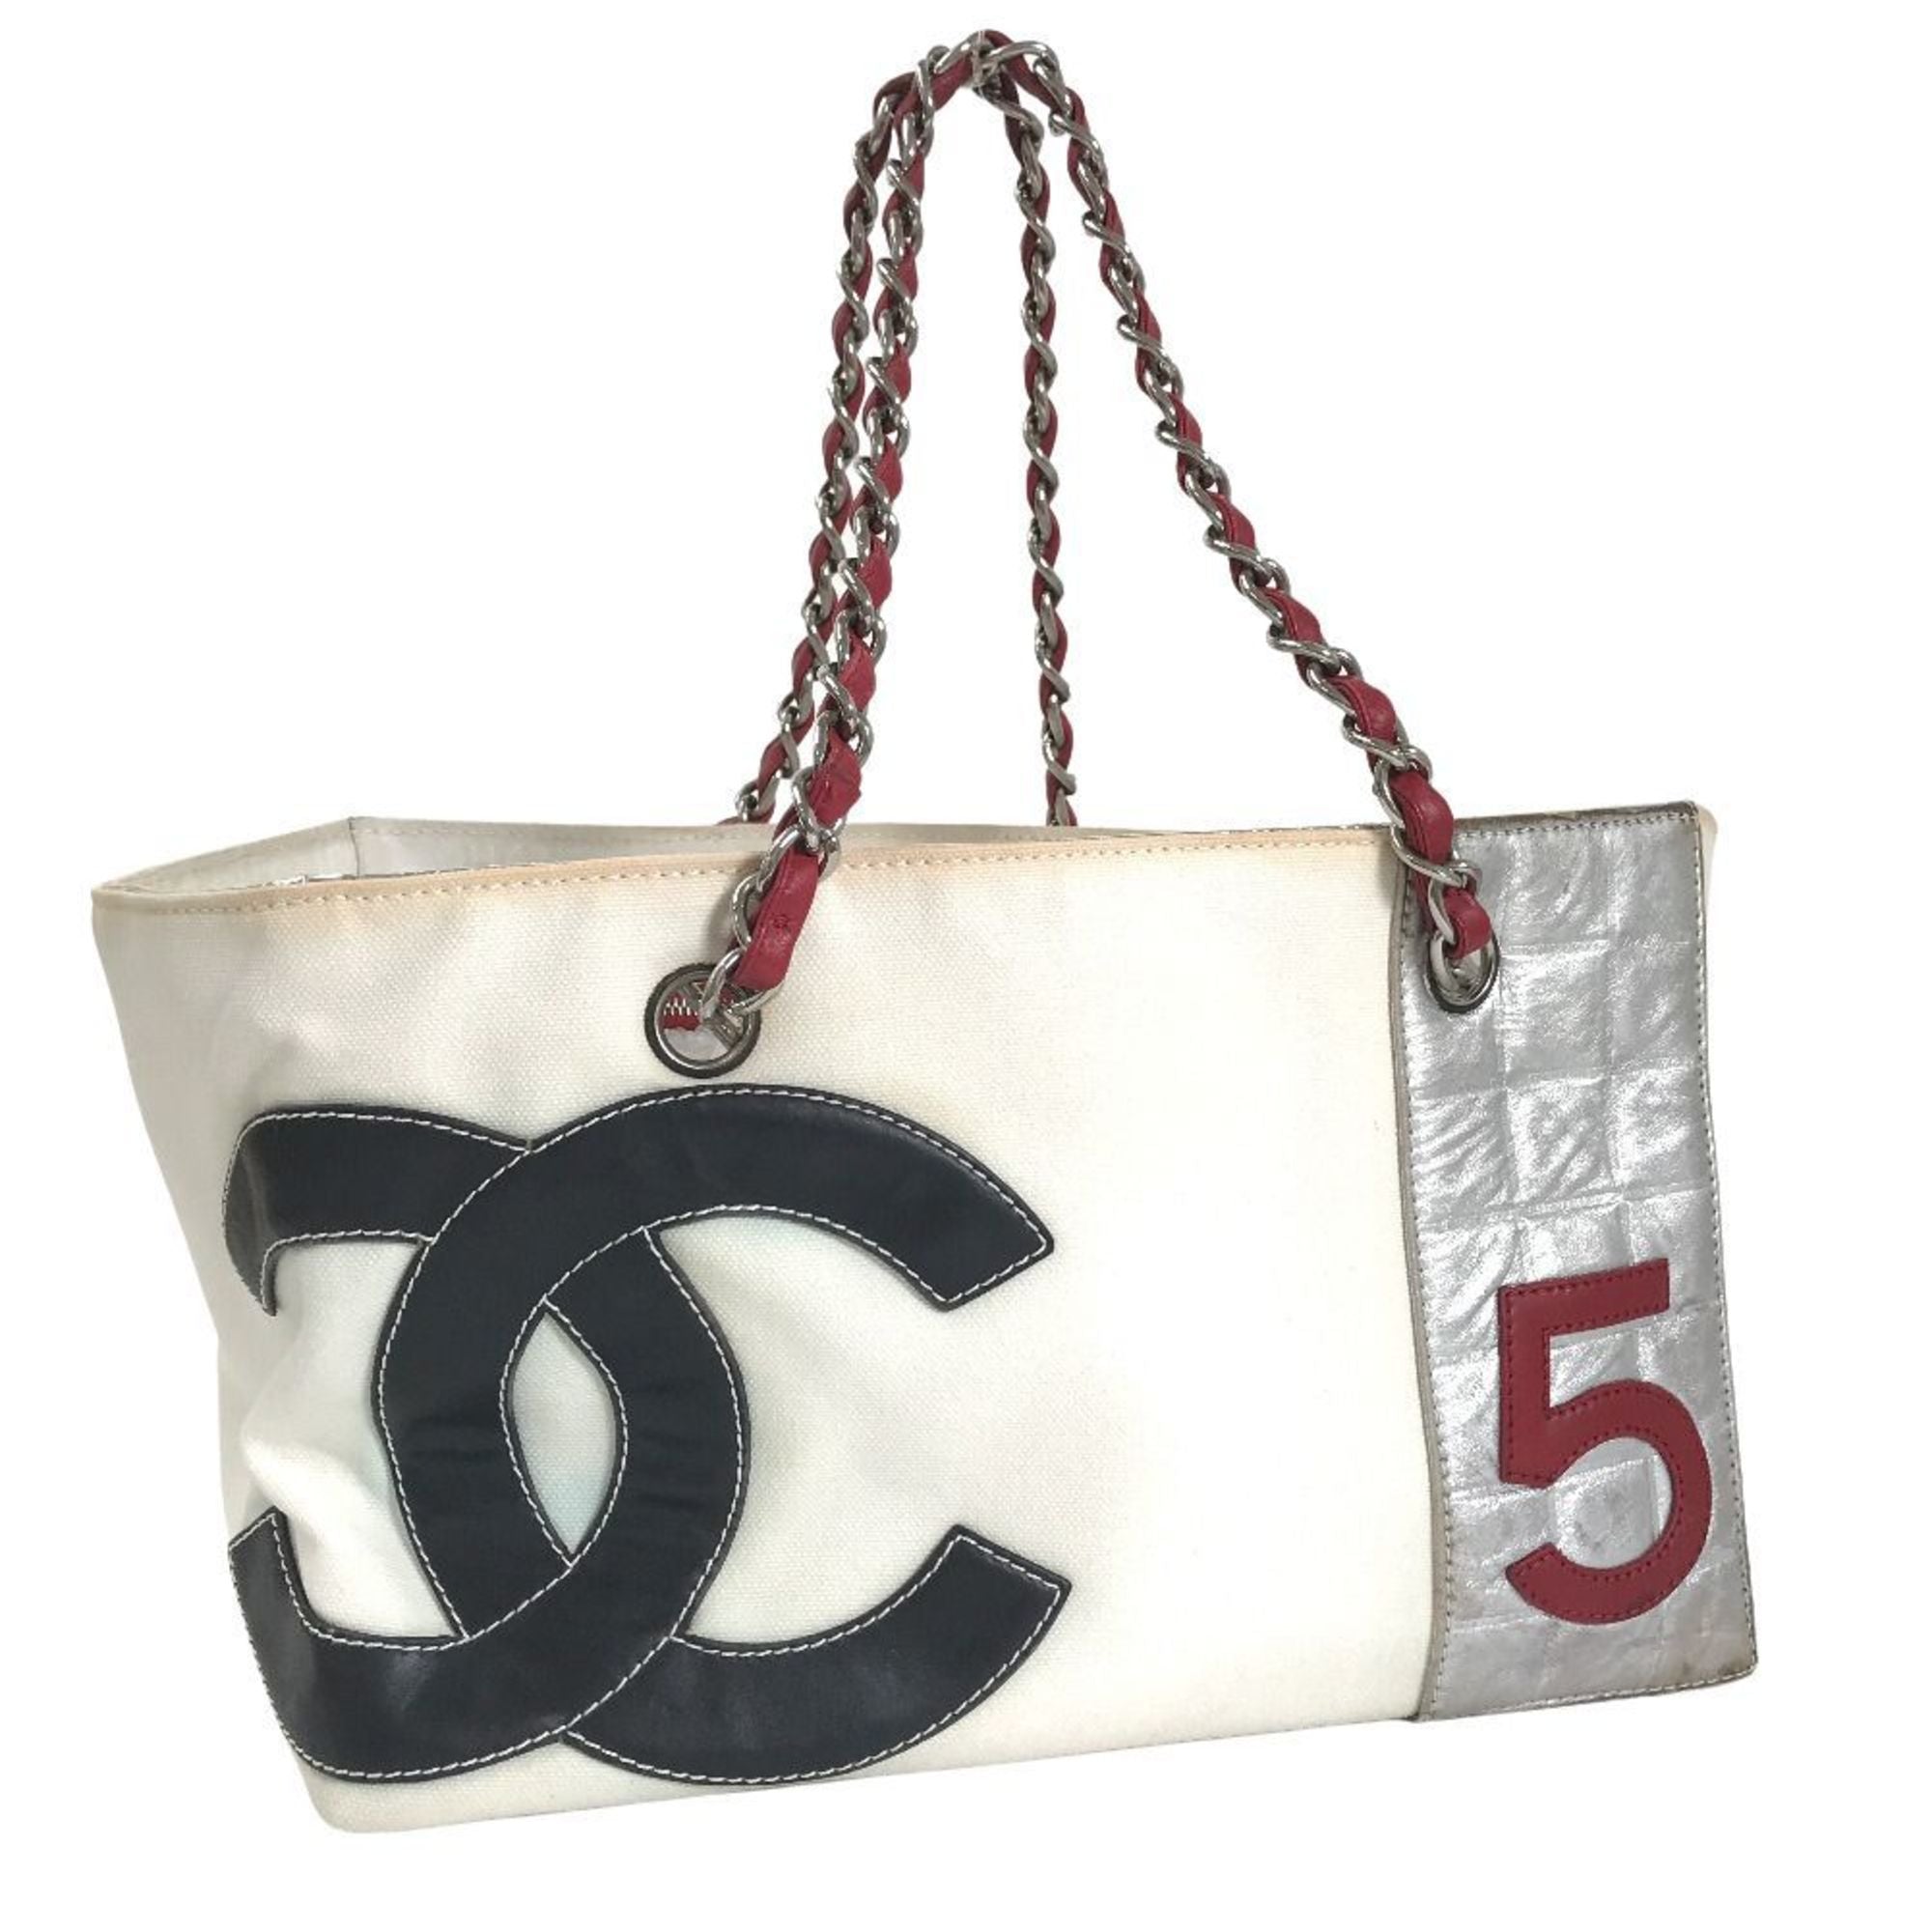 CHANEL Tote Bag 5x5 with Whistle in White and Black Canvas at